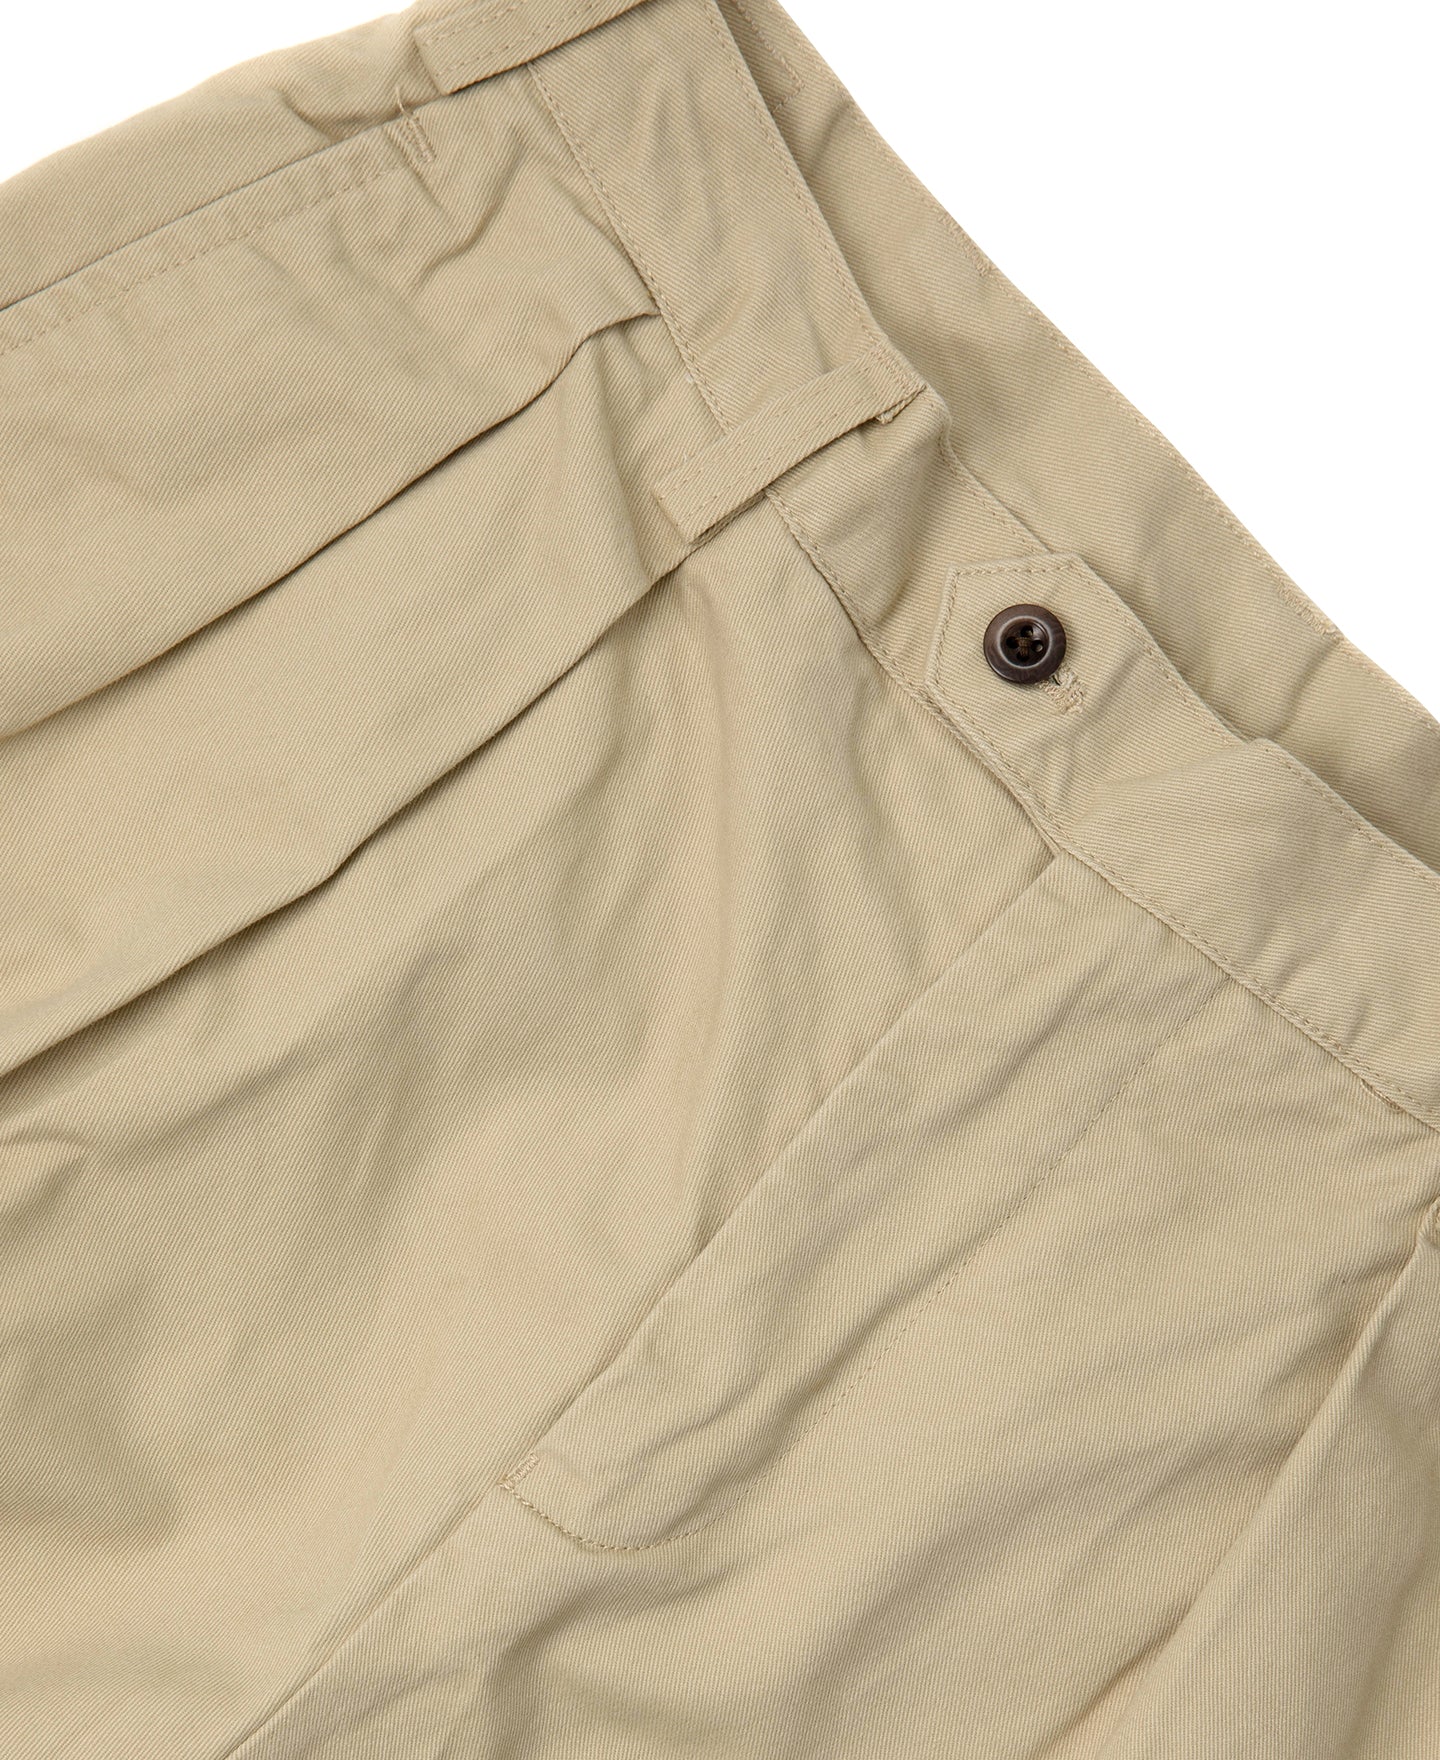 1930s IVY Style Double Pleated Chino Trousers - Khaki